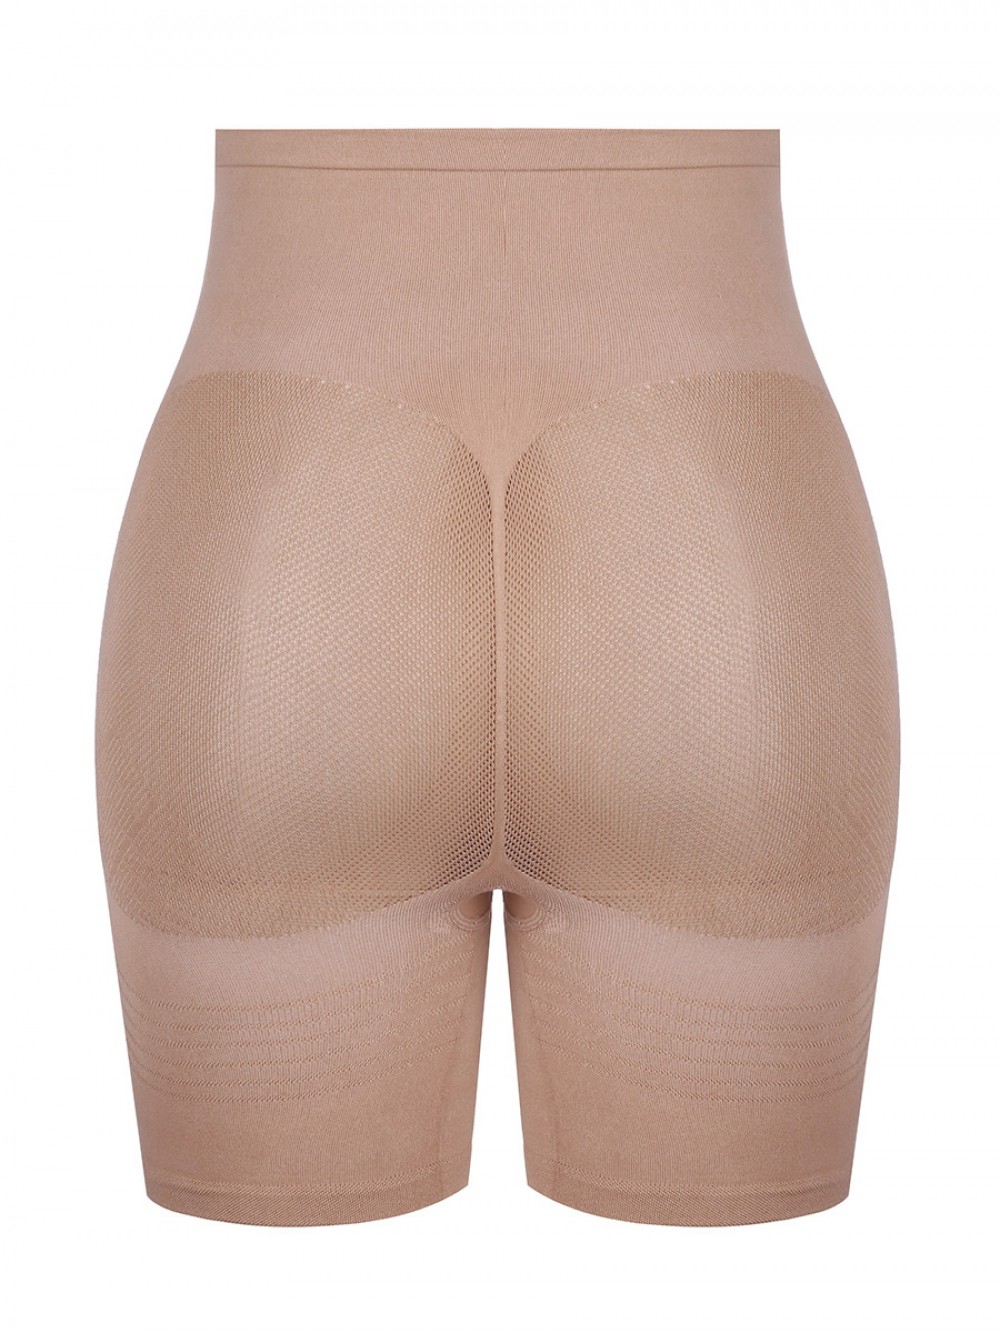 Skin Color Thigh Length Body Shaper Buttock Lifter High Rise Breathable